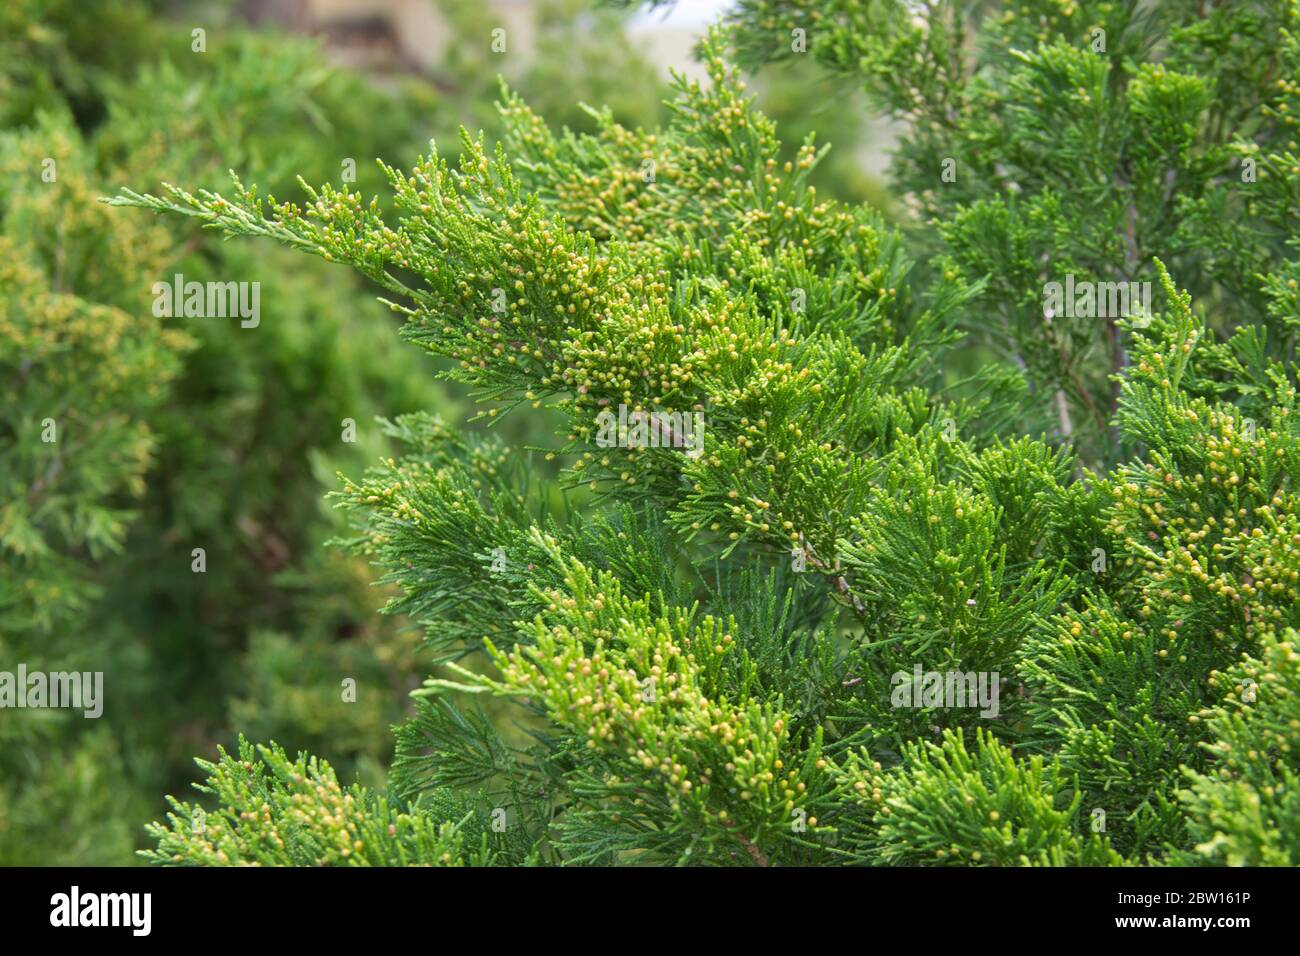 branch of a juicy green cypress. trees are grown in gardens and parks as ornamental plants.  Stock Photo